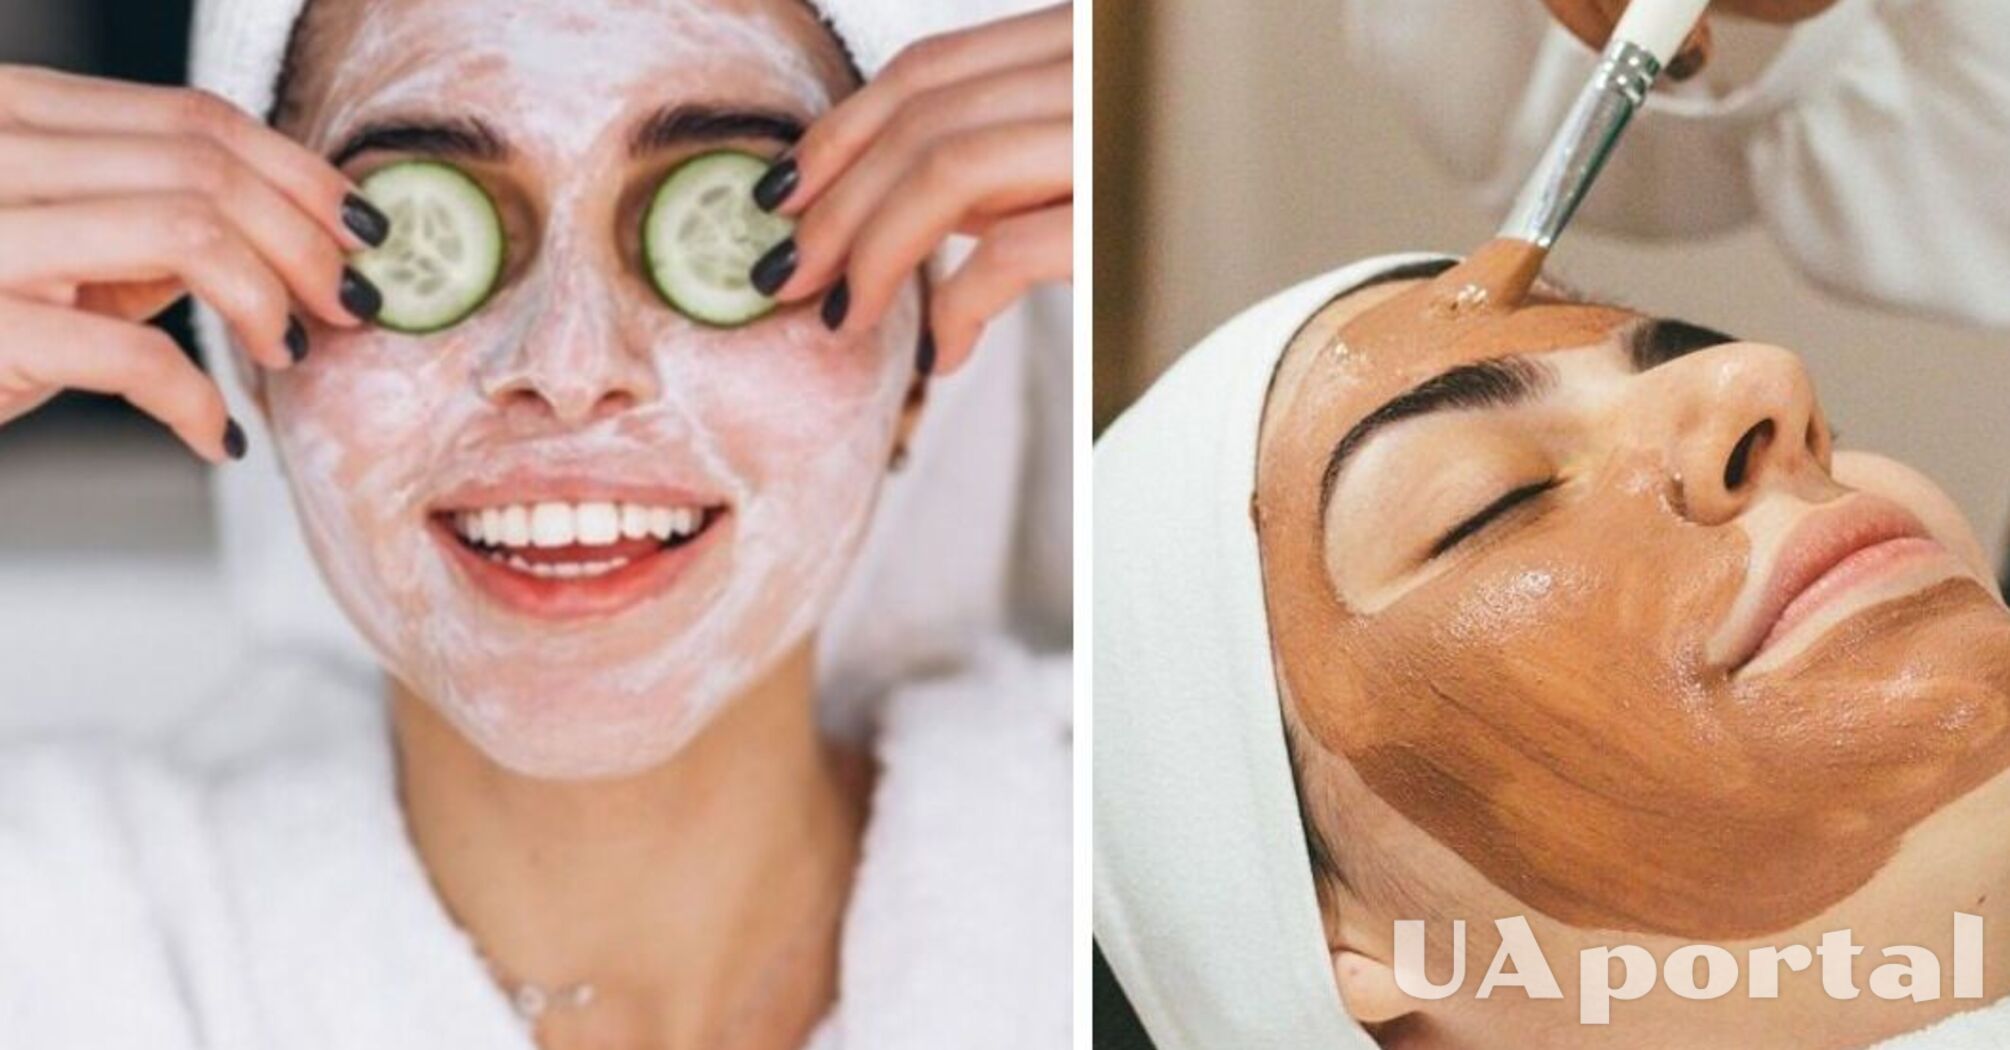 Cleansing, masks and peeling: how to prepare your skin for spring